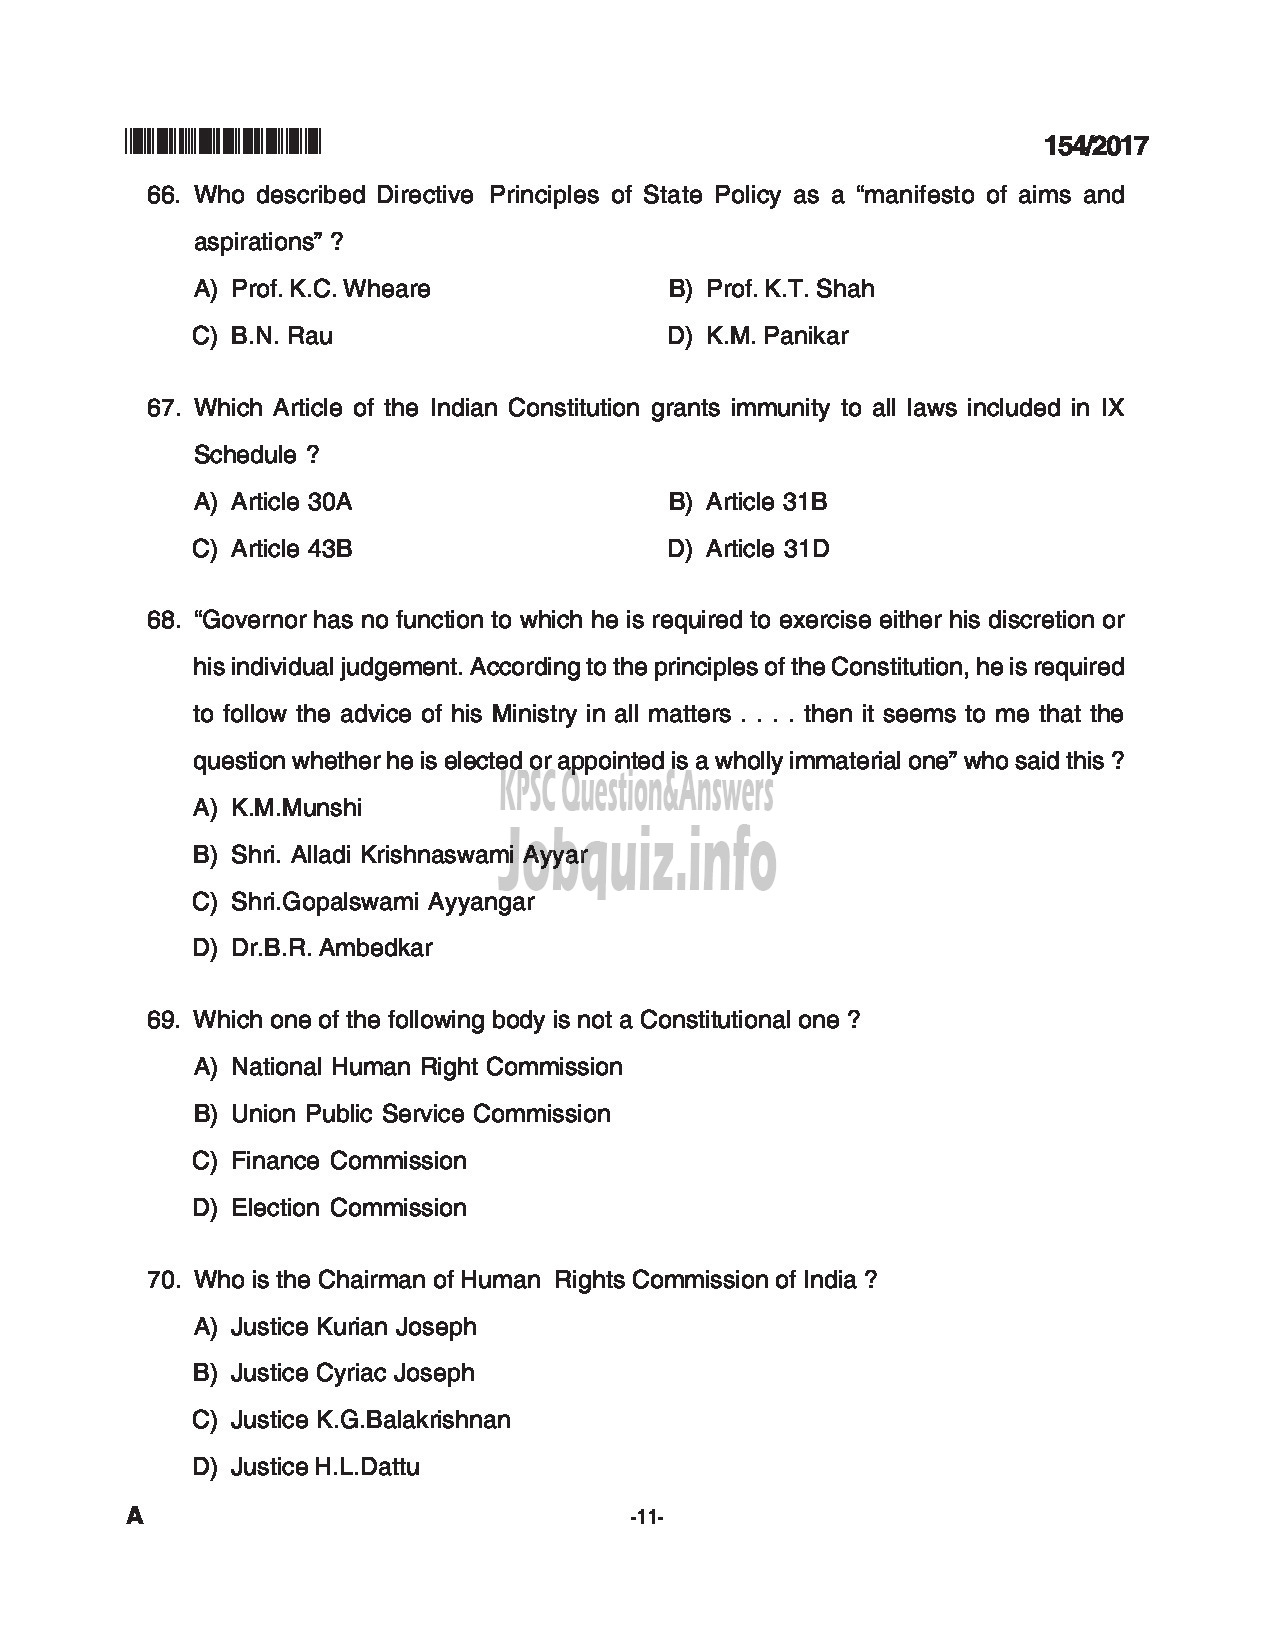 Kerala PSC Question Paper - ARMED POLICE SUB INSPECTOR TRAINEE SR FOR SC/ST POLICE ARMED POLICE BATTALION-11